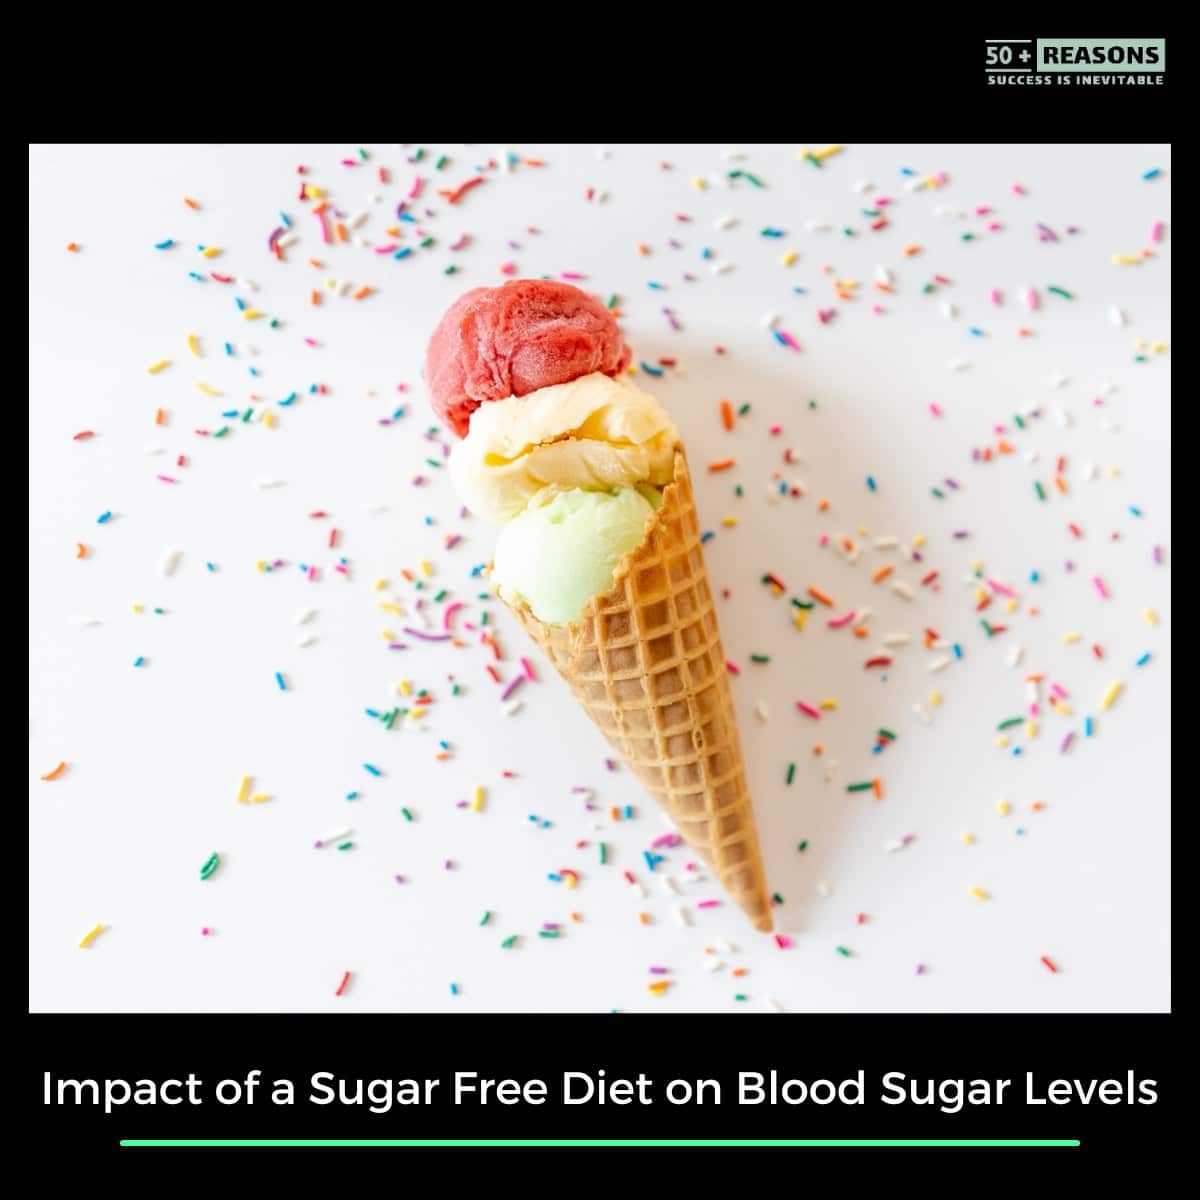 Impact of a Sugar Free Diet on Blood Sugar Levels